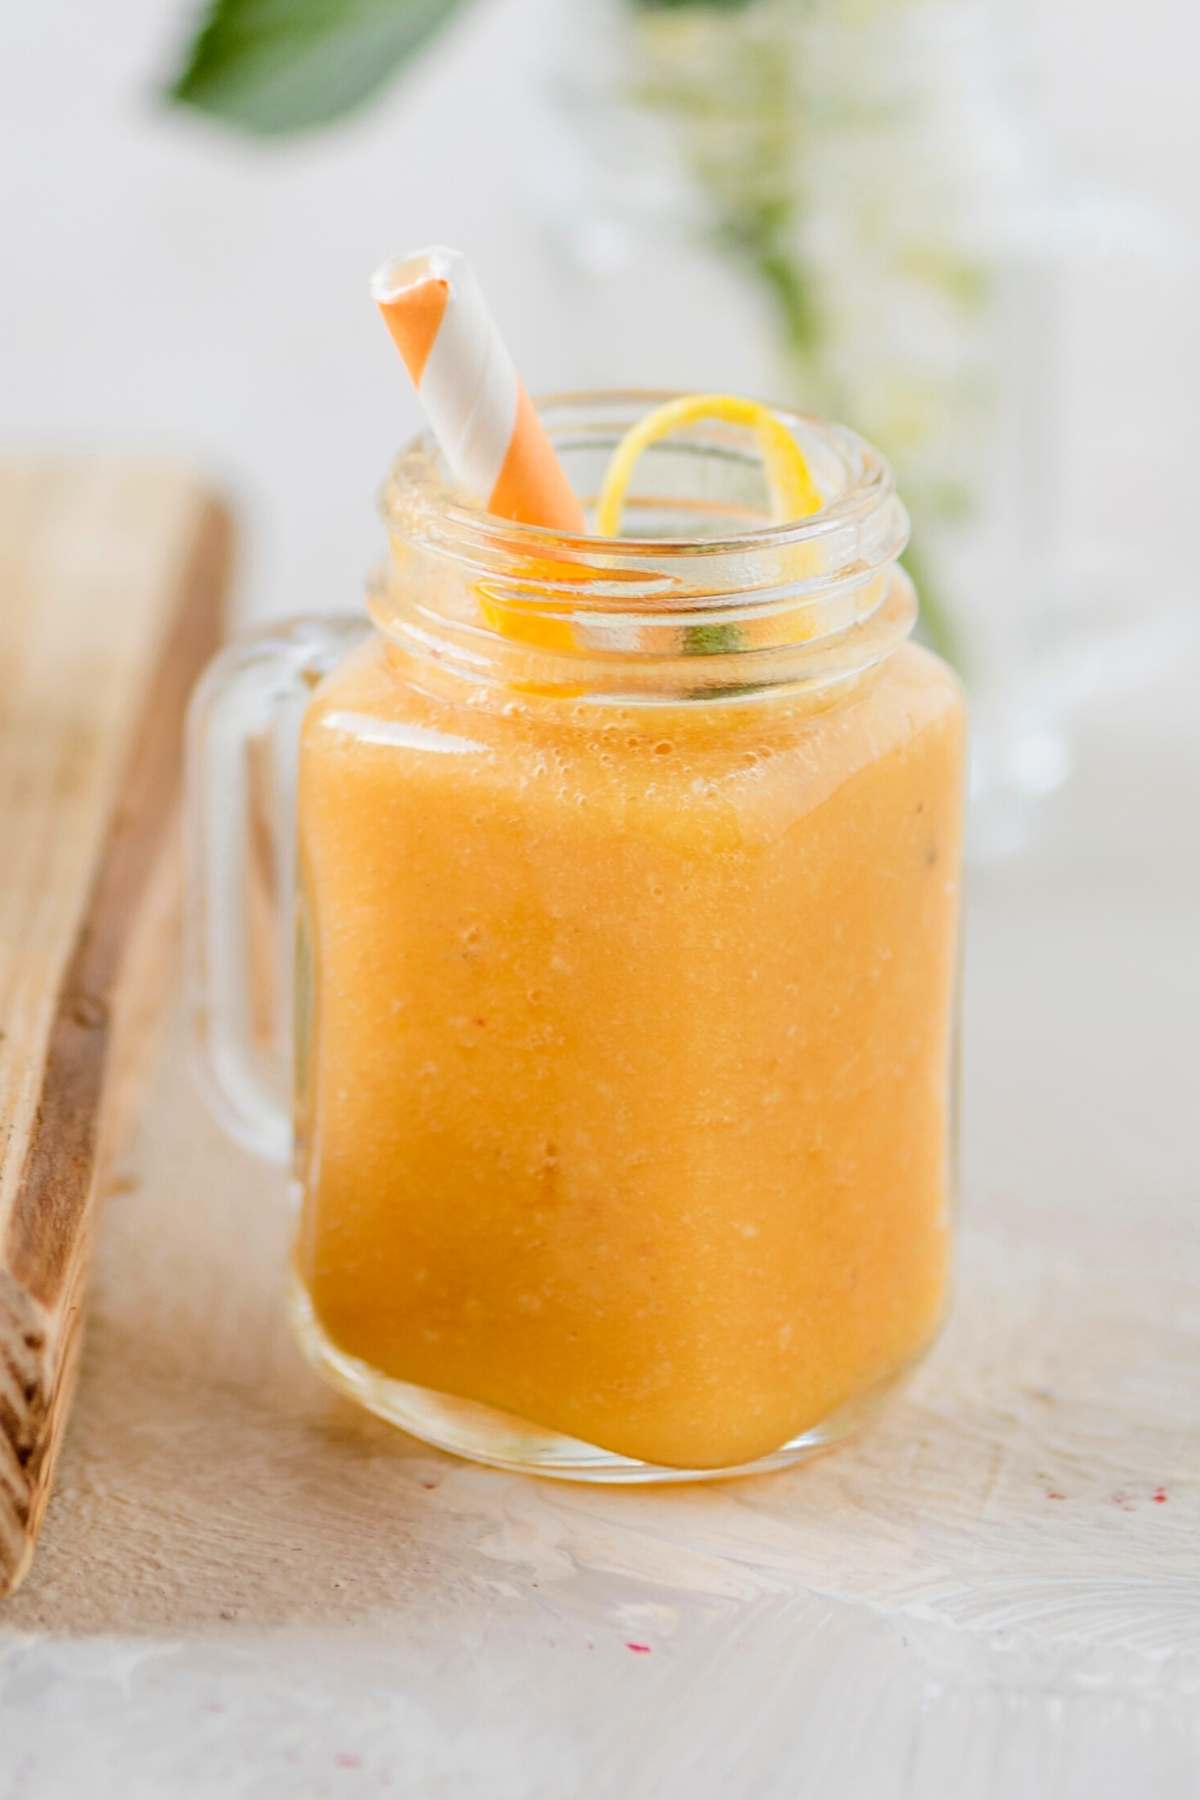 Introducing the liquid version of one of your favorite frozen treats! With its creamy orange flavor, you can enjoy this Orange Dreamsicle as a fabulous frozen cocktail, a boozy float, or a sweet shot.